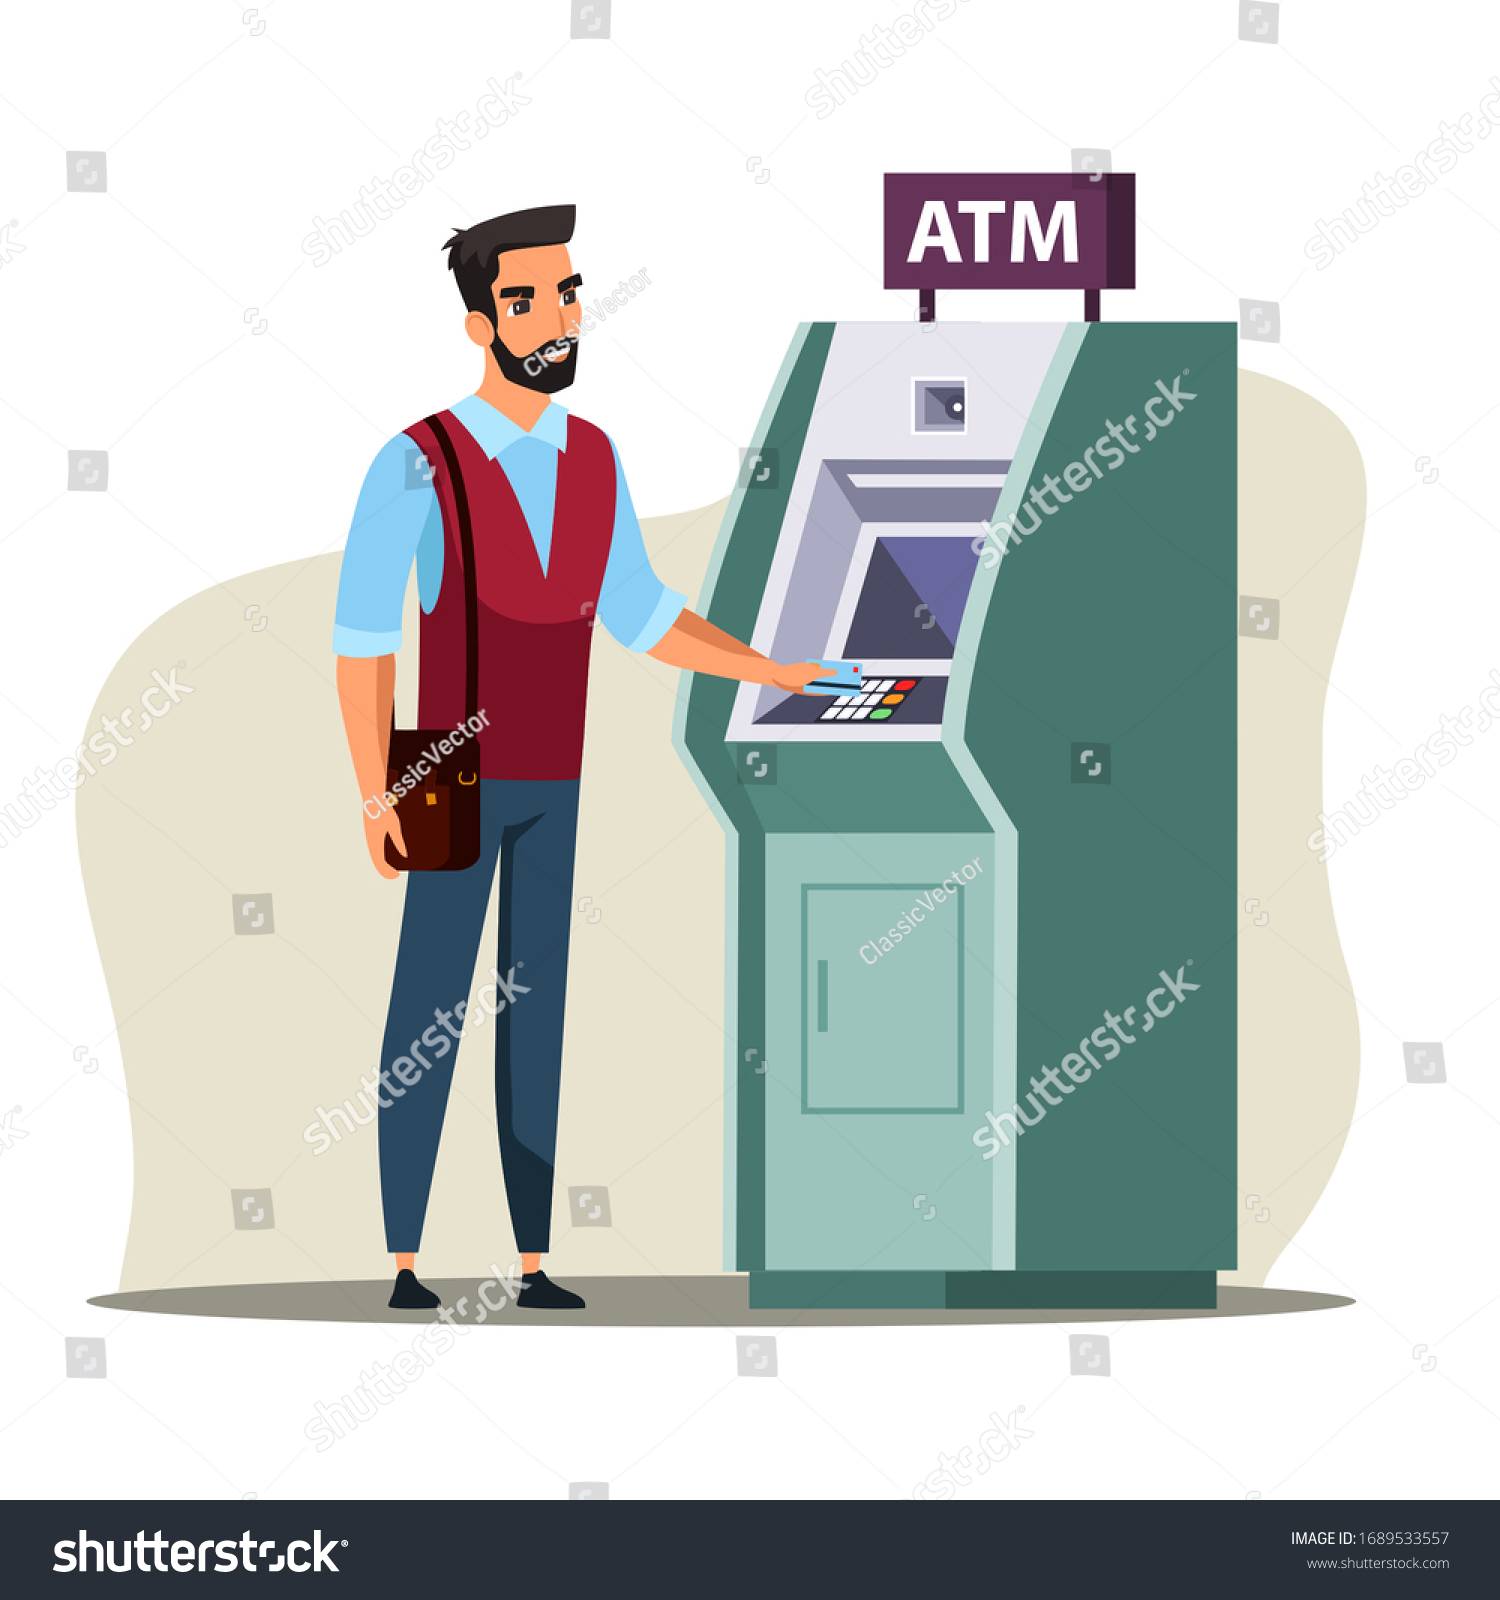 Young man using cashpoint flat color illustration. Guy working with ATM interface cartoon character. Bank visitor performing electronic transaction vector drawing. Banking service design element #1689533557